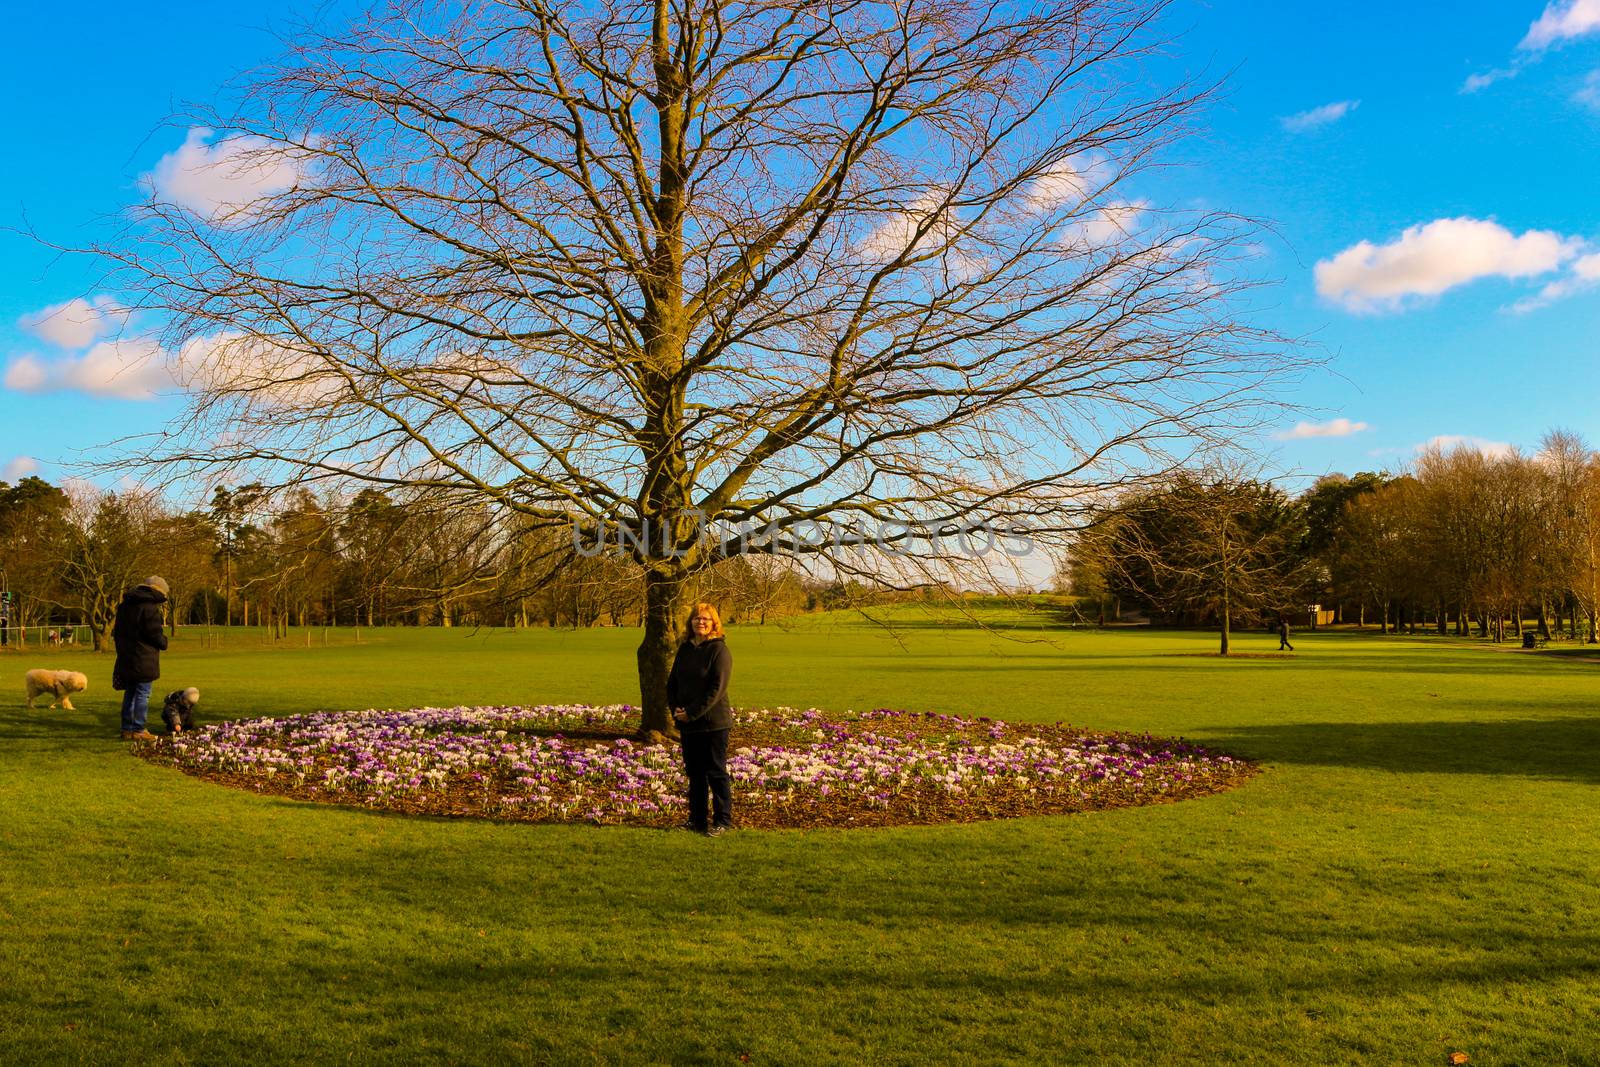 Women next to a tree with plenty of blooming crocus flowers, a p by mynewturtle1